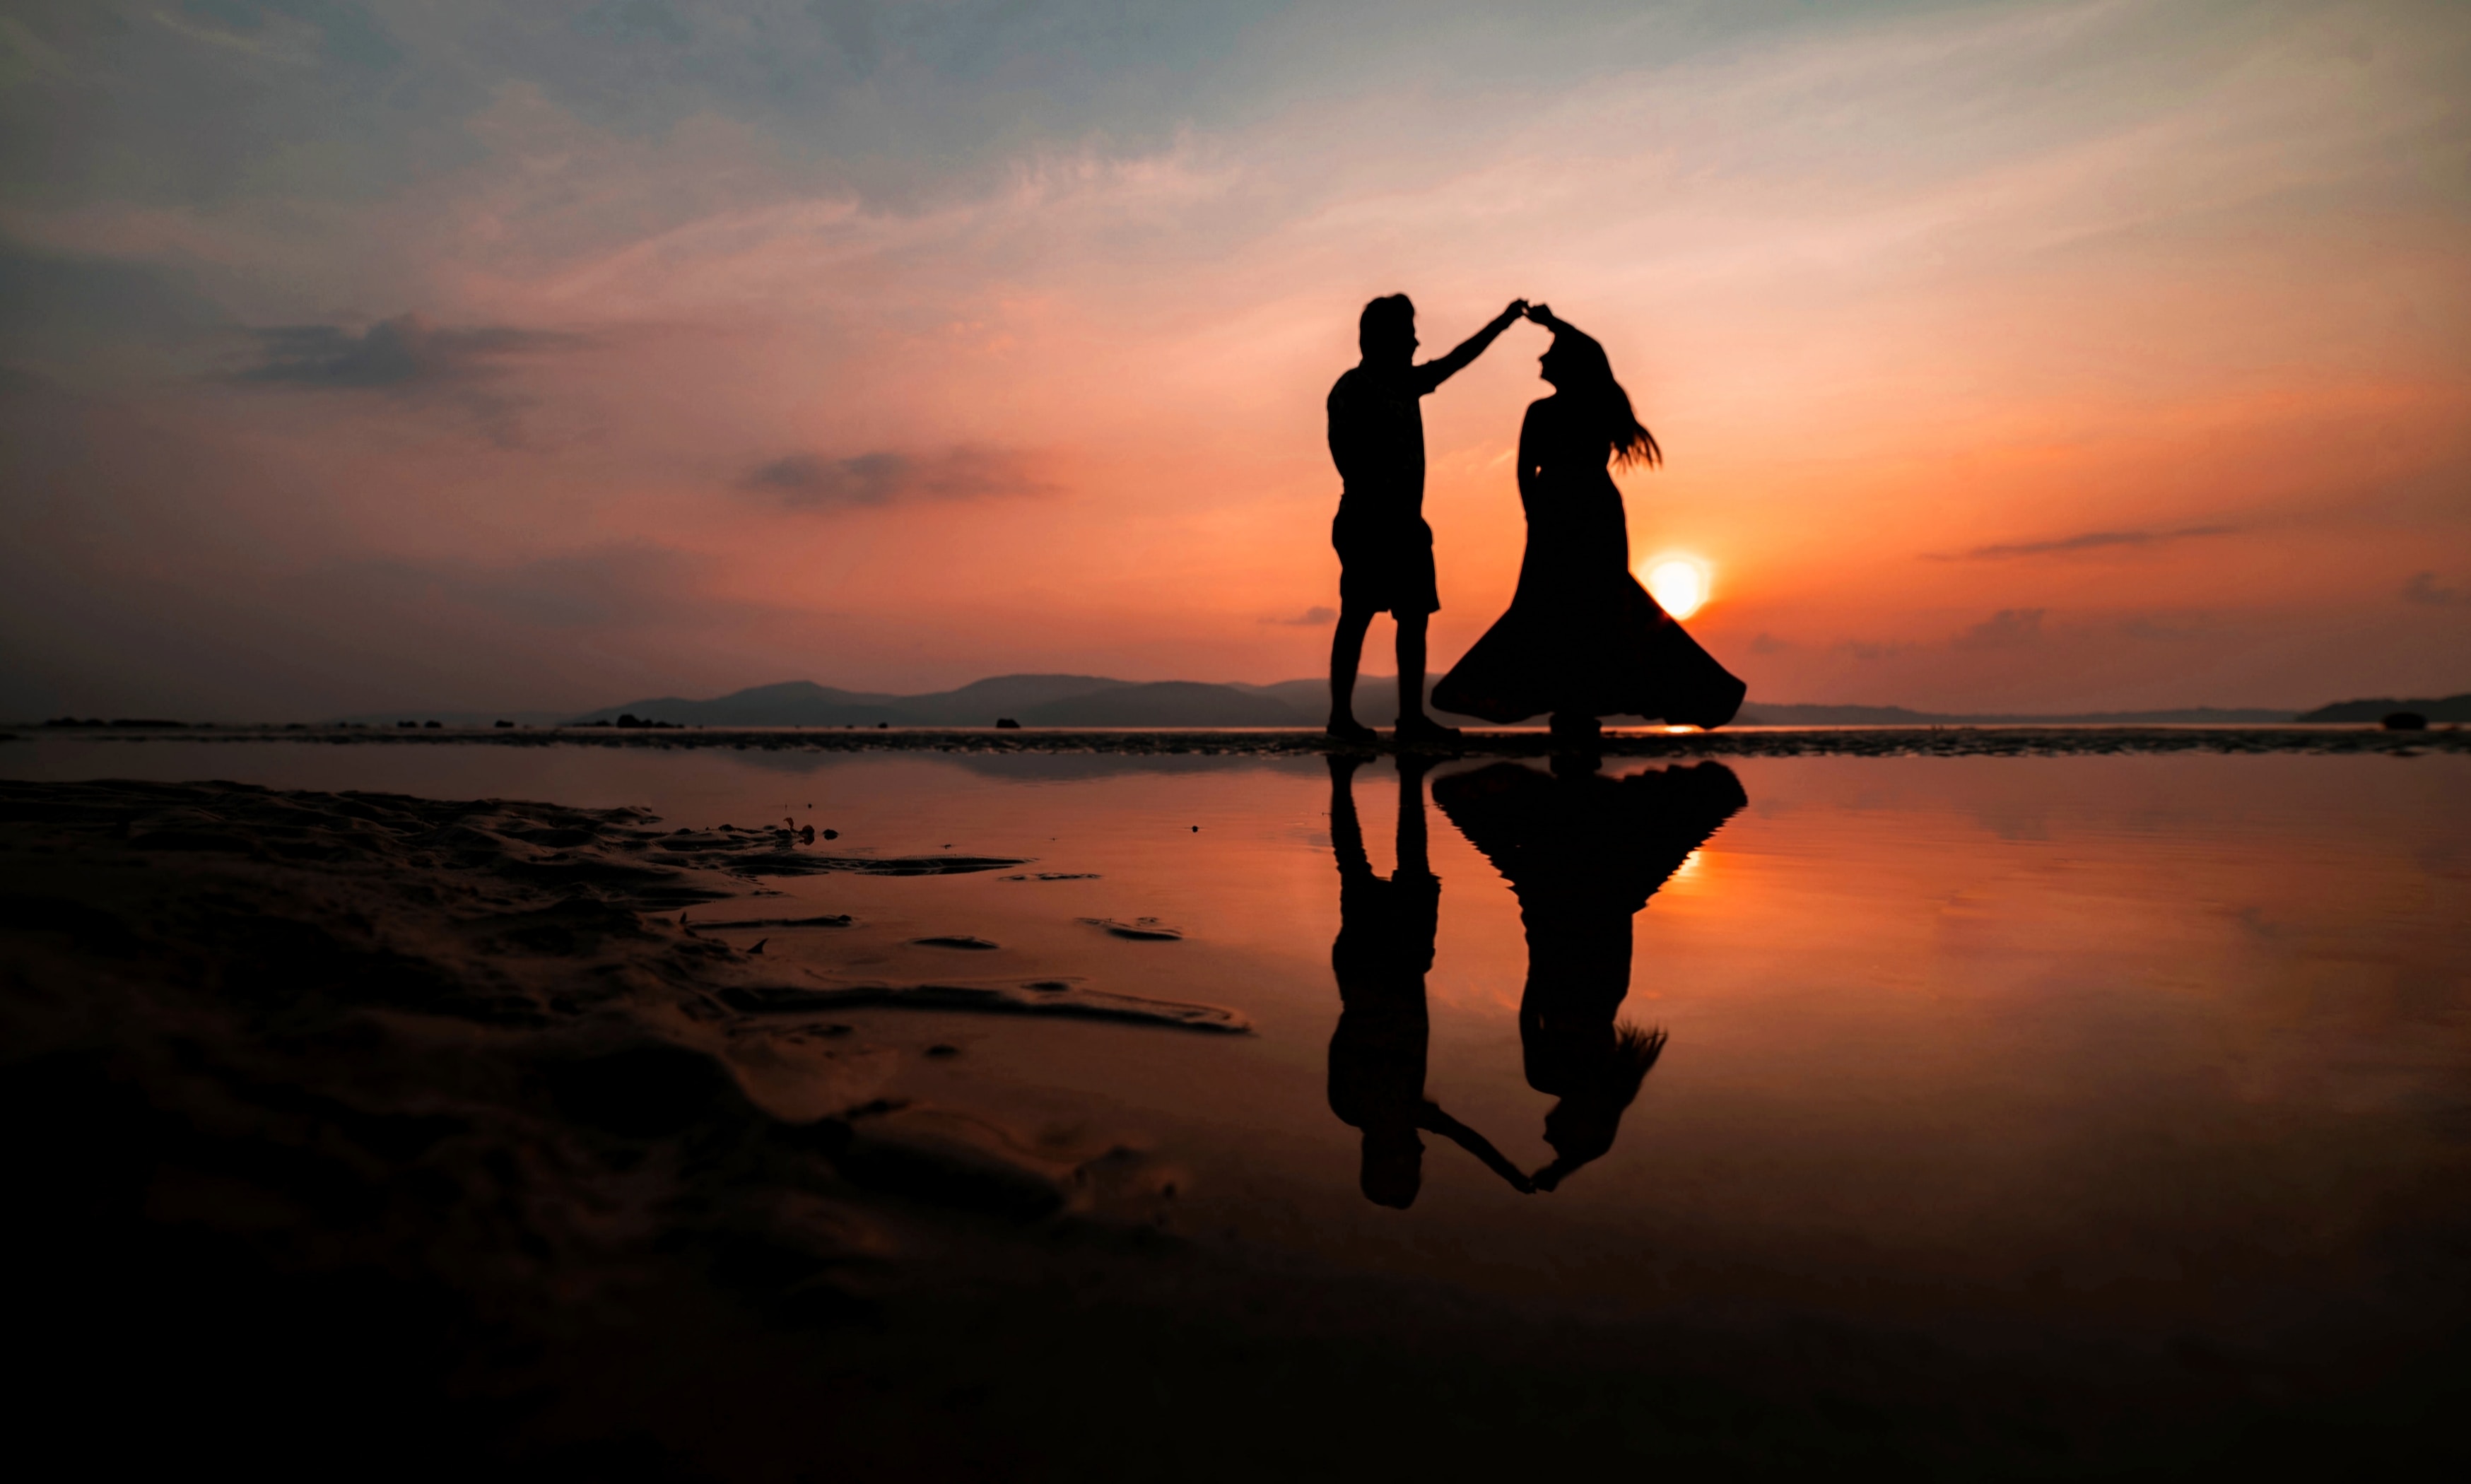 Silhouette of man and woman on a beach during sunset. | Source: Unsplash